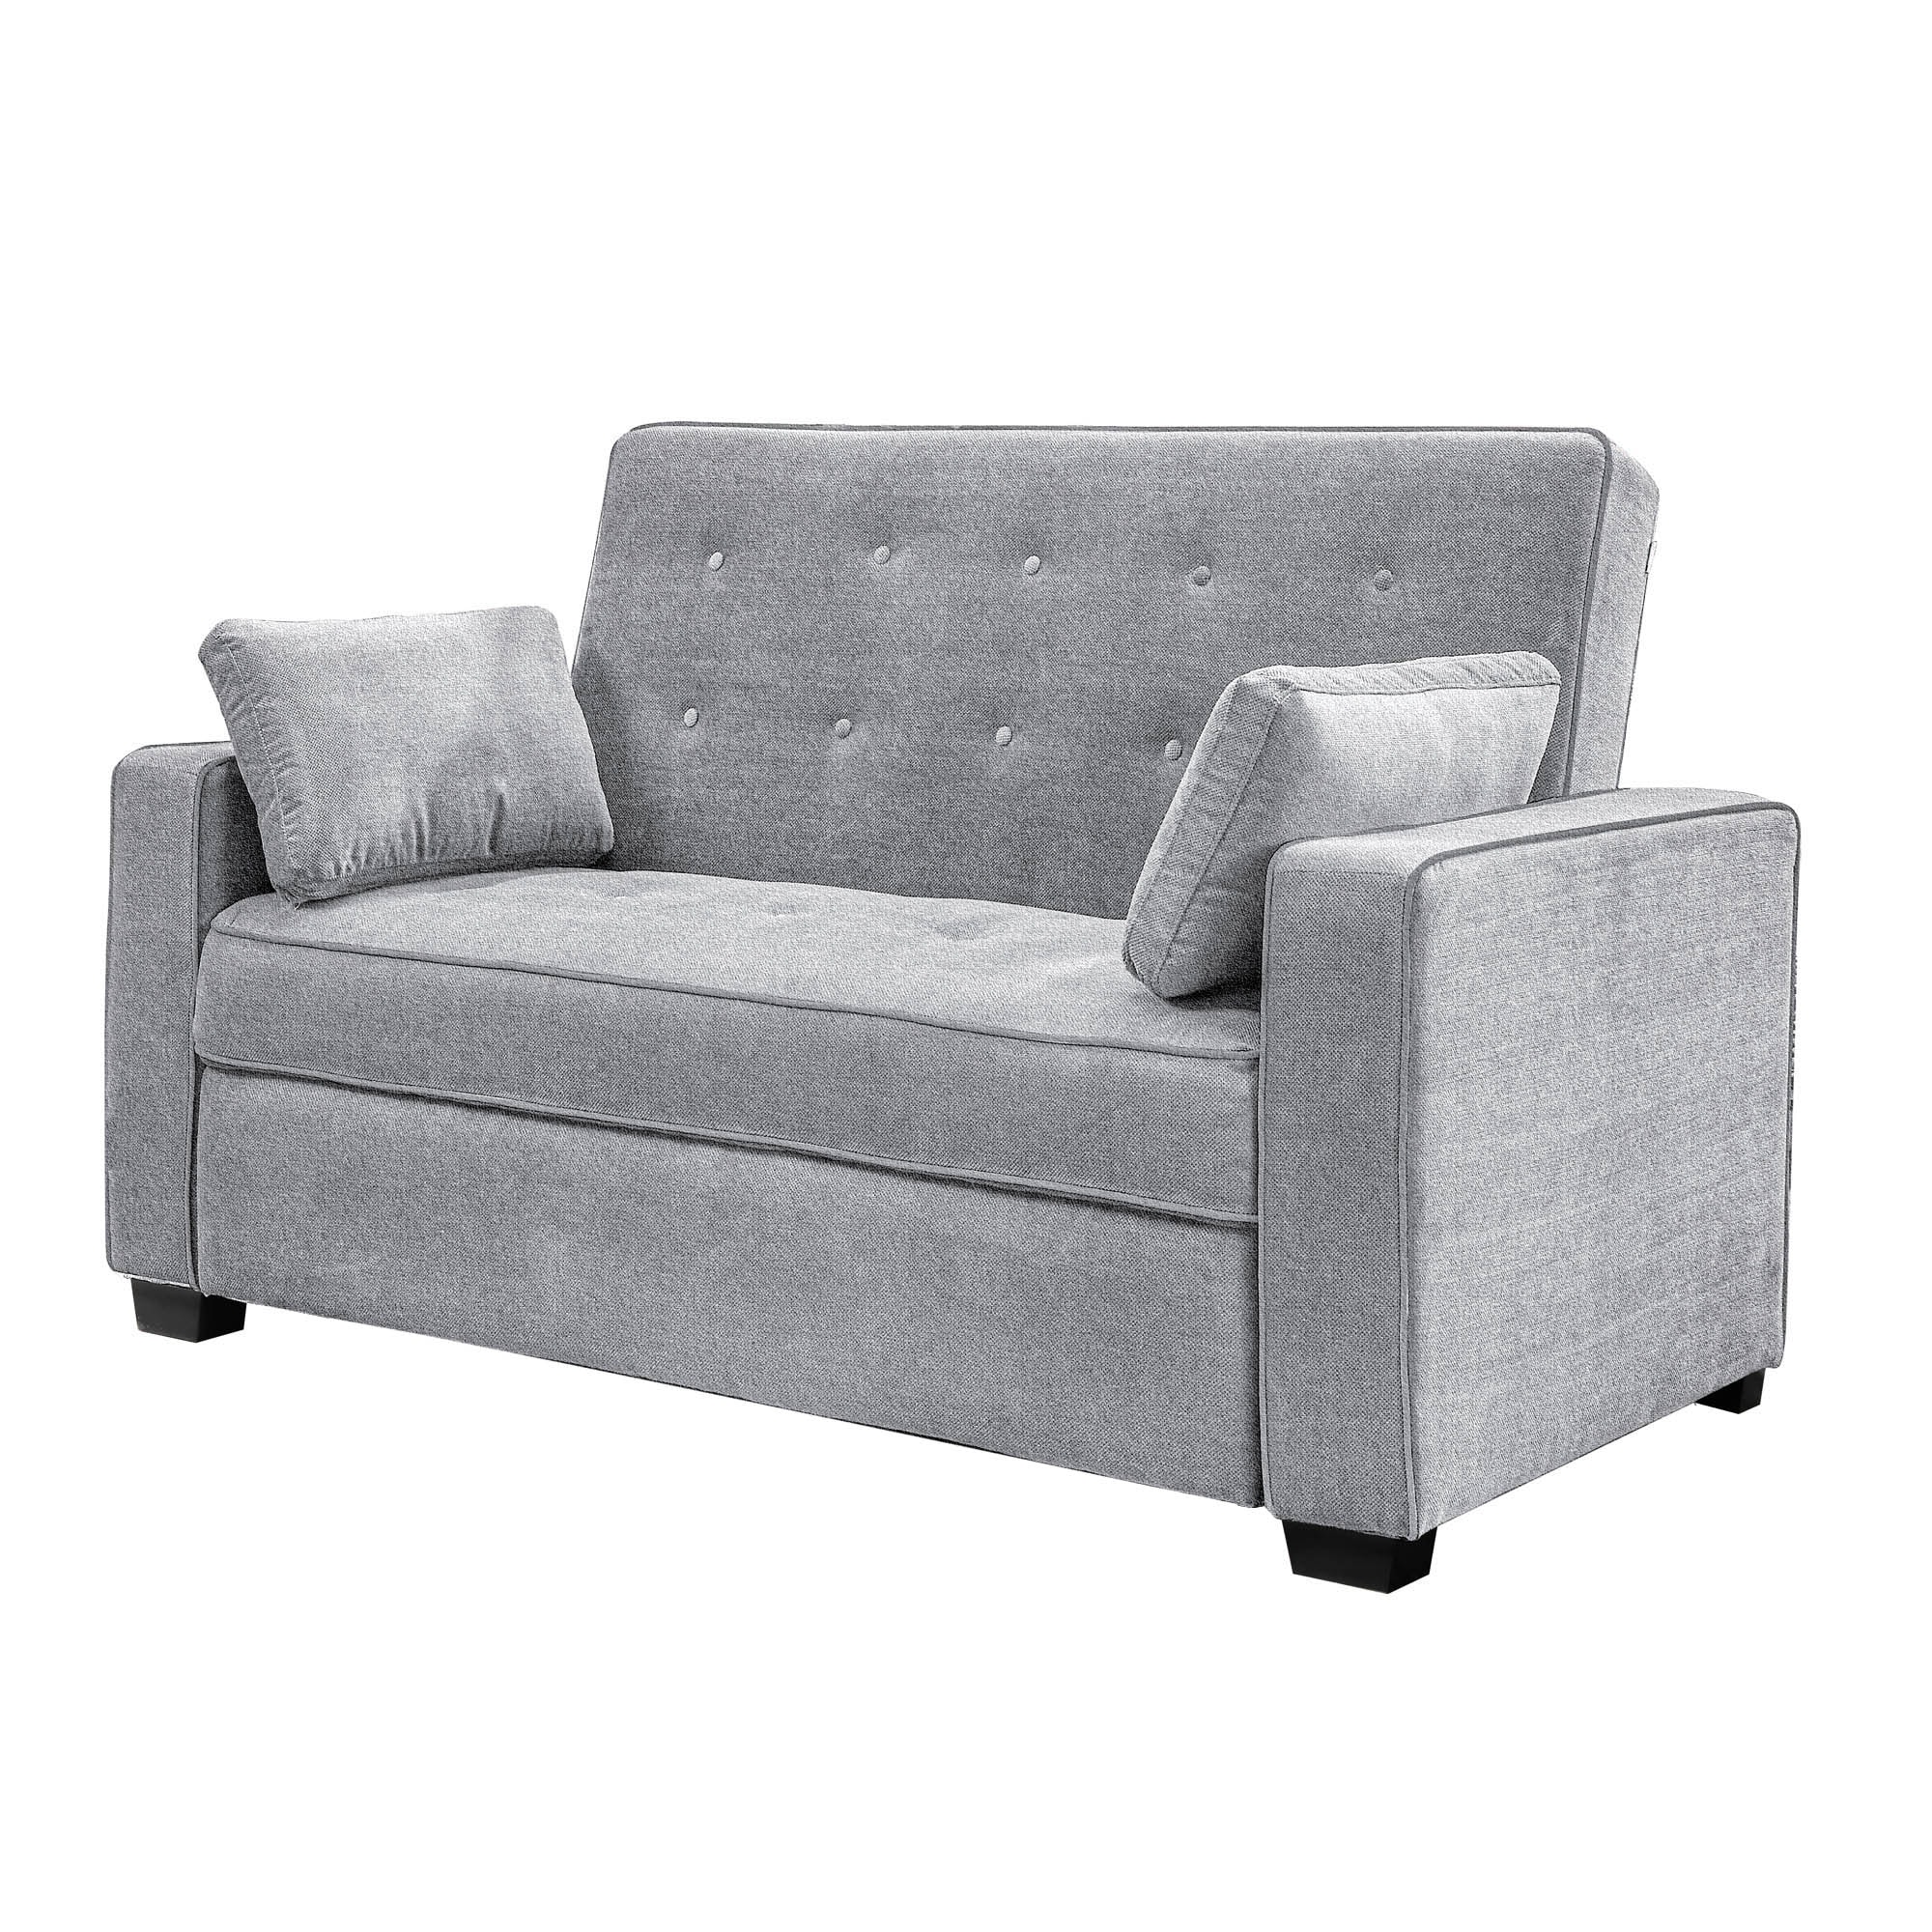 Serta Arya Couches, Grey Polyester/Blend at 66.5-in Sofas the Light Loveseats & Modern department Sofa 2-seater in